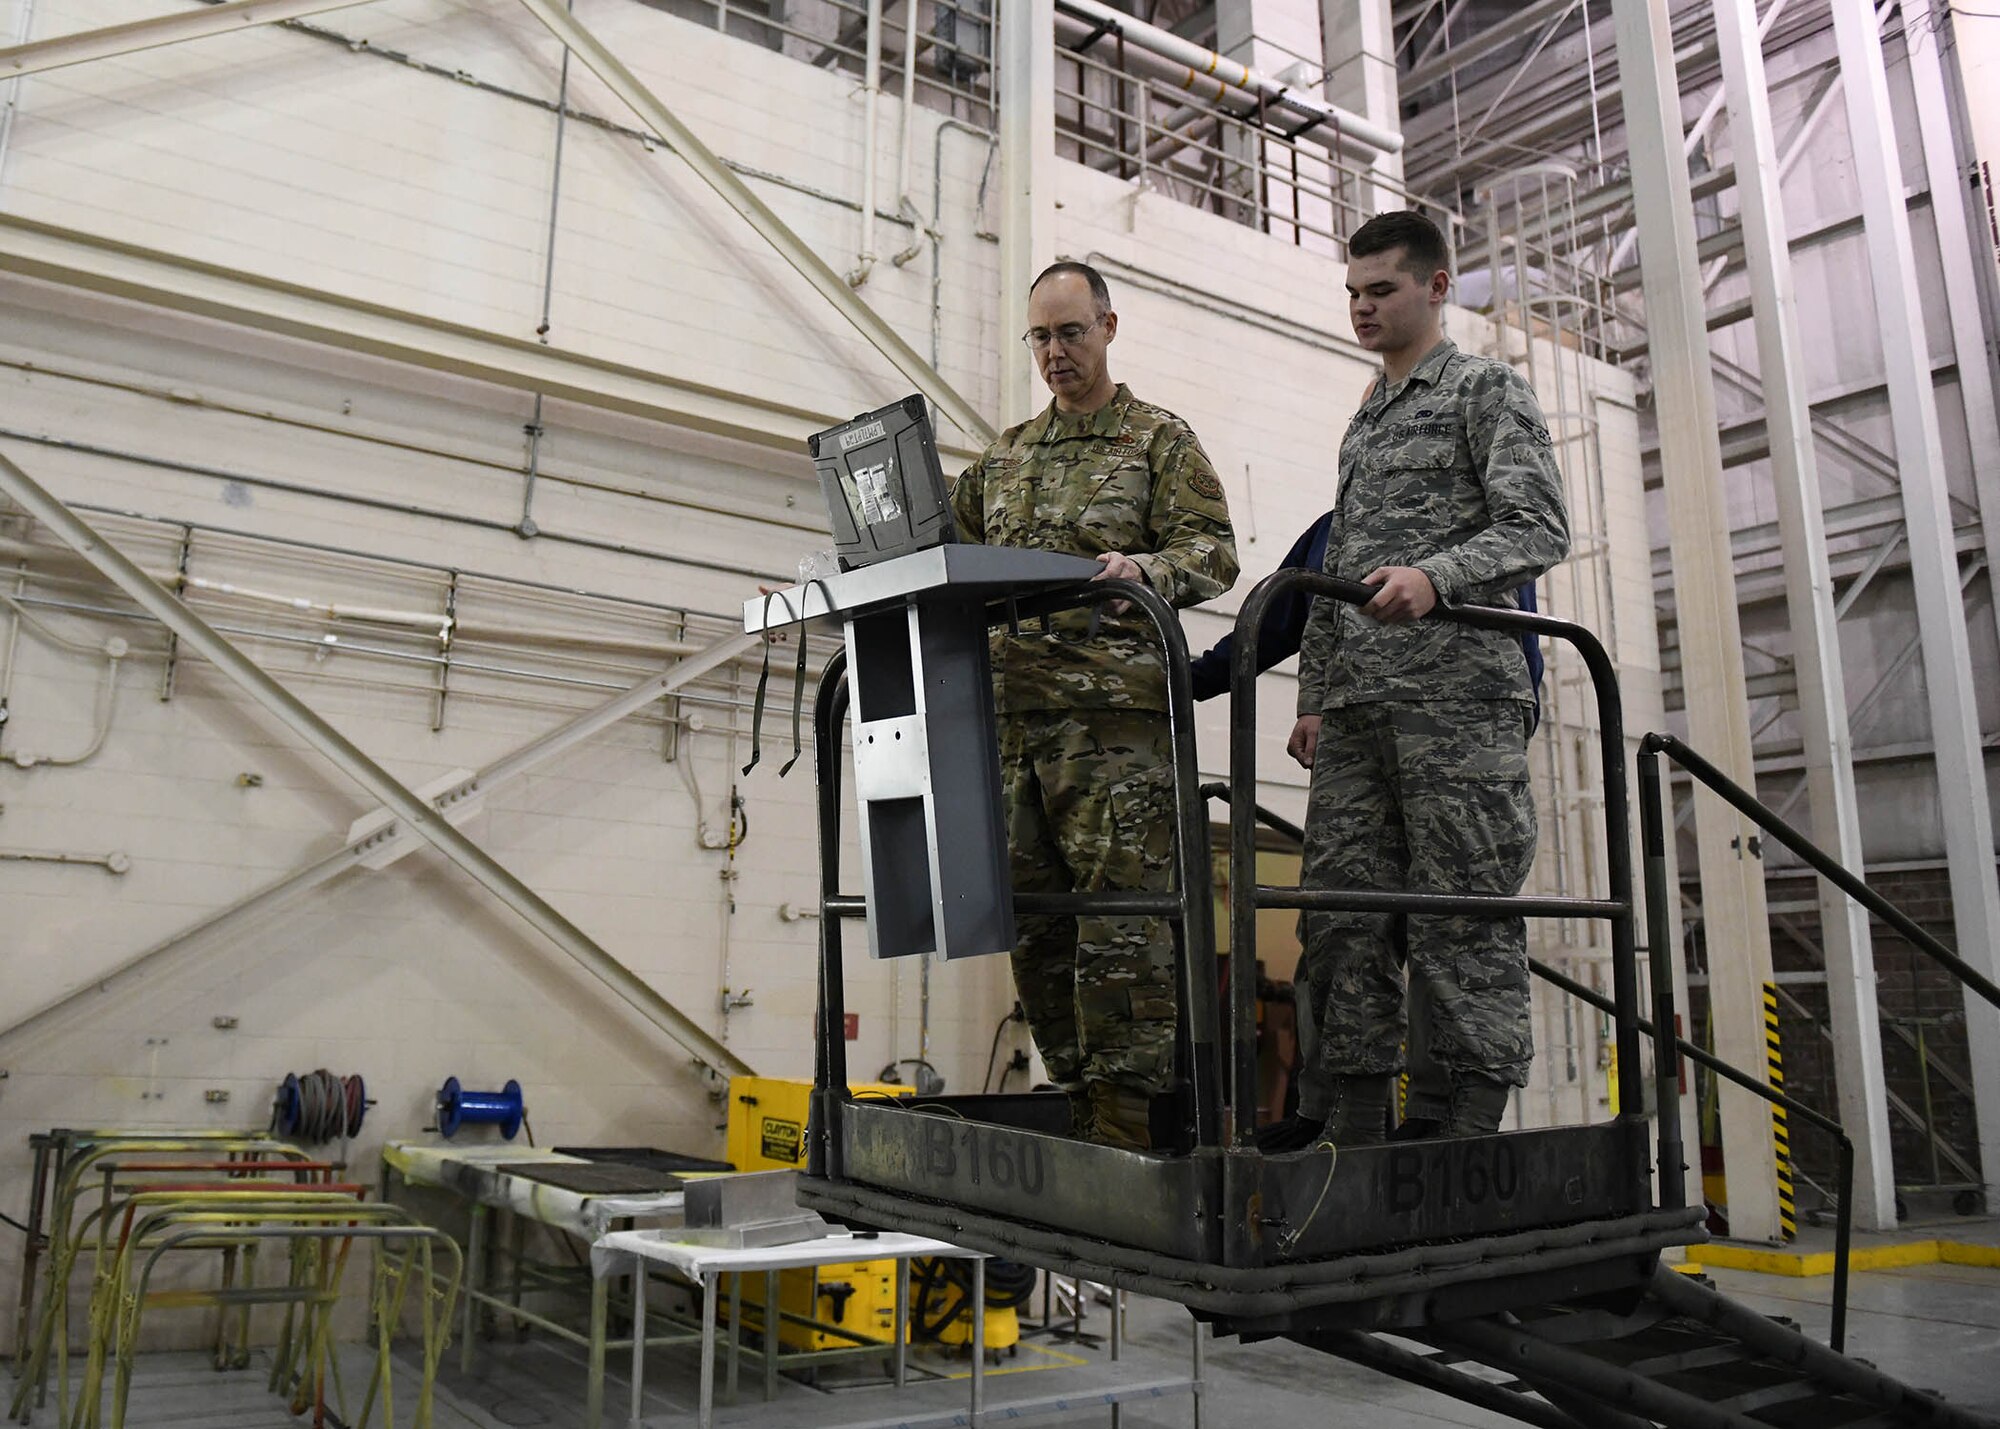 Two Airmen look at a metal stand used to hold tools and a laptop.